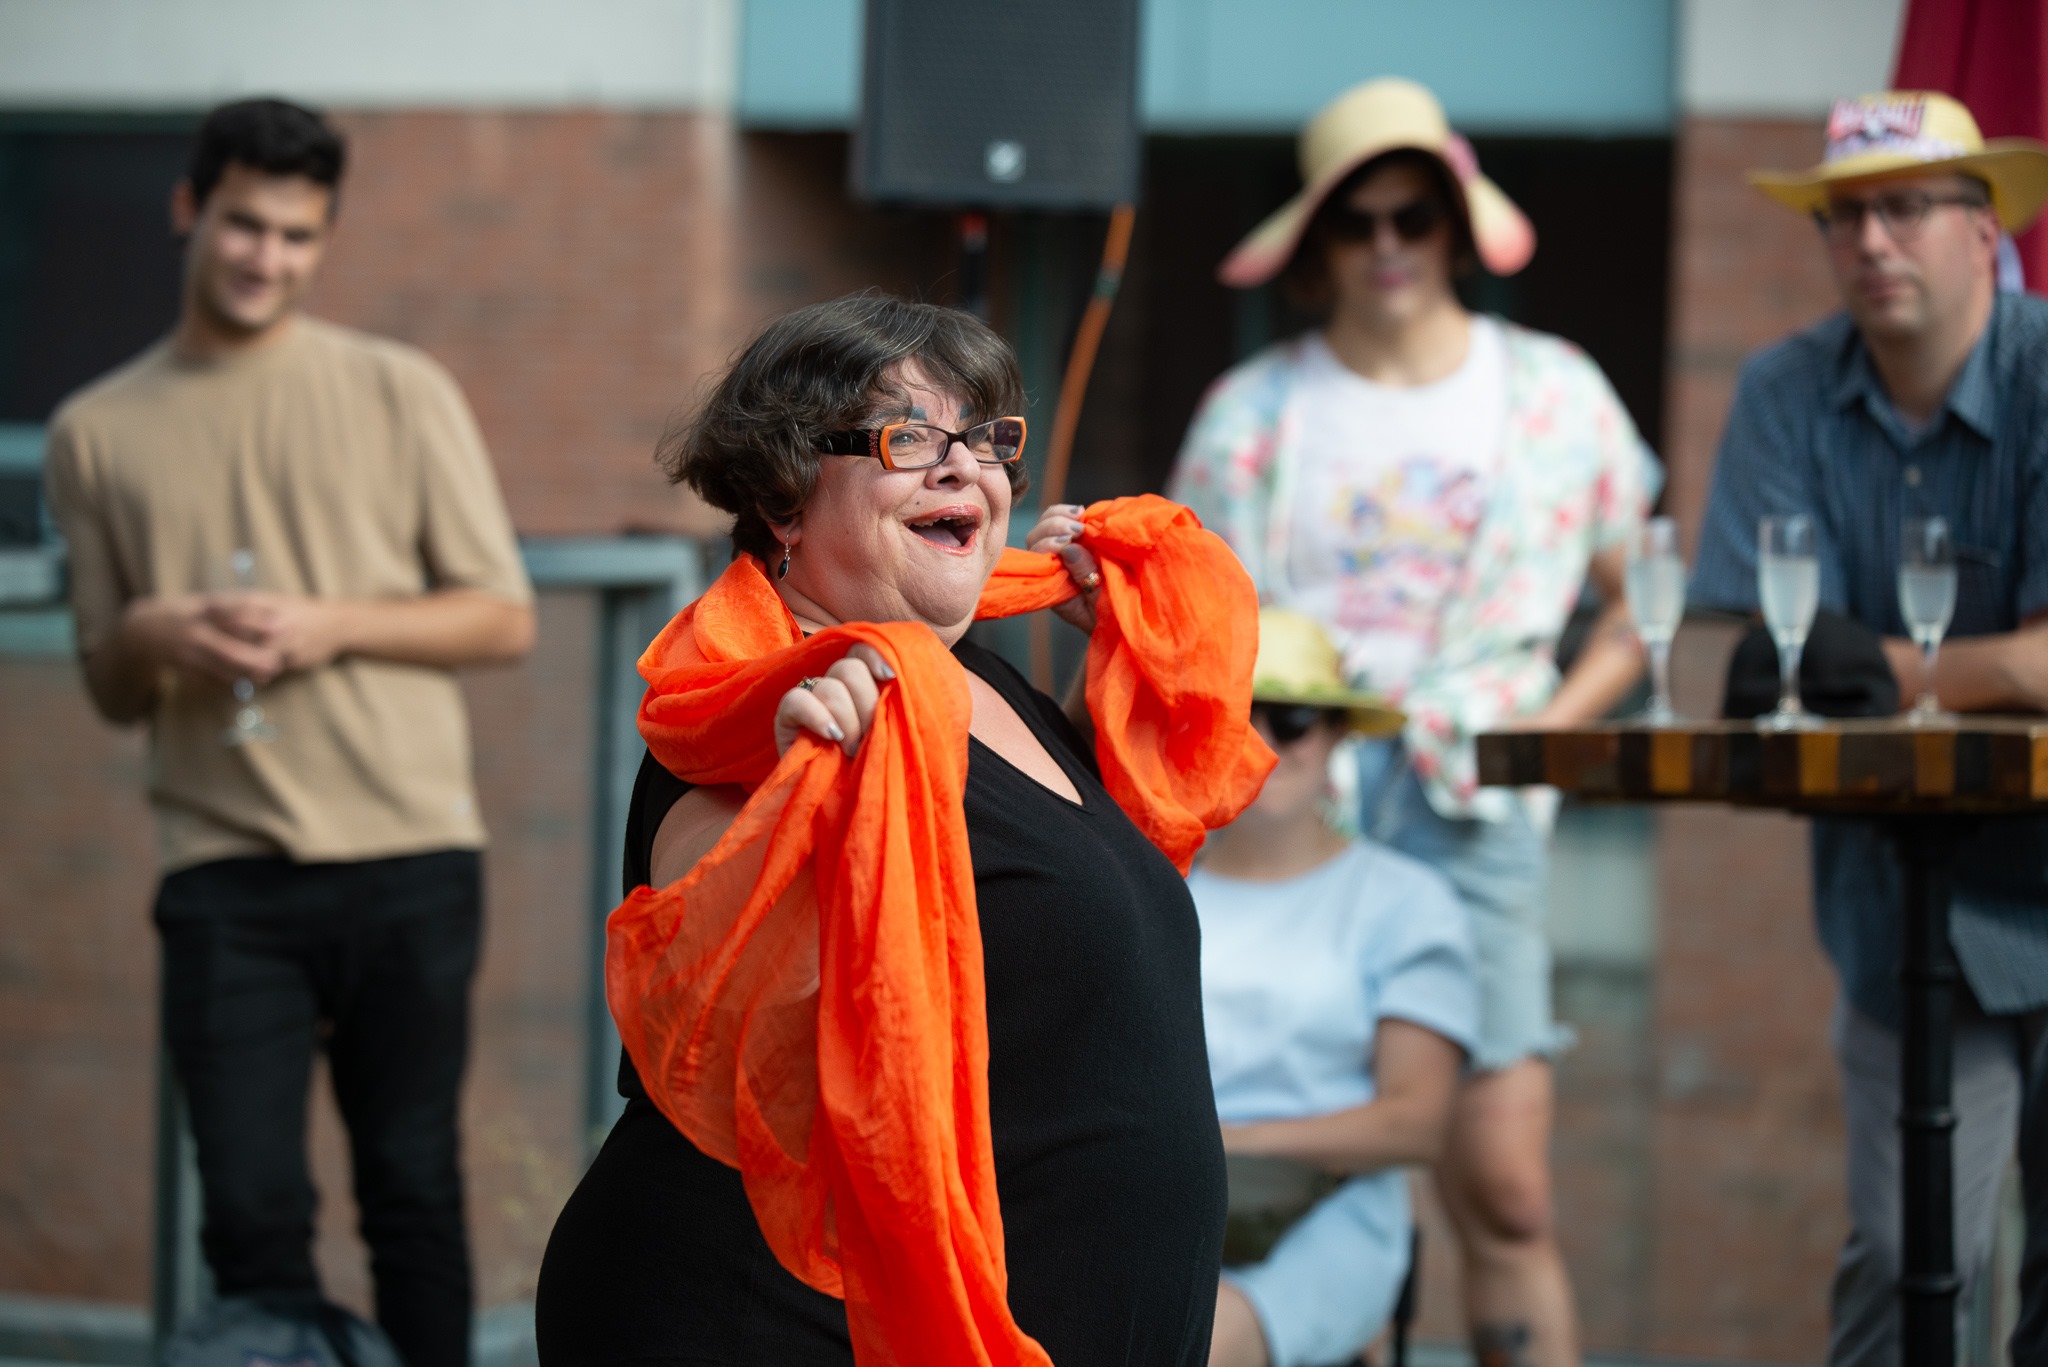 A smiling person with glasses performs wrapped in an orange scarf. Four audience members can be seen in the background behind them.